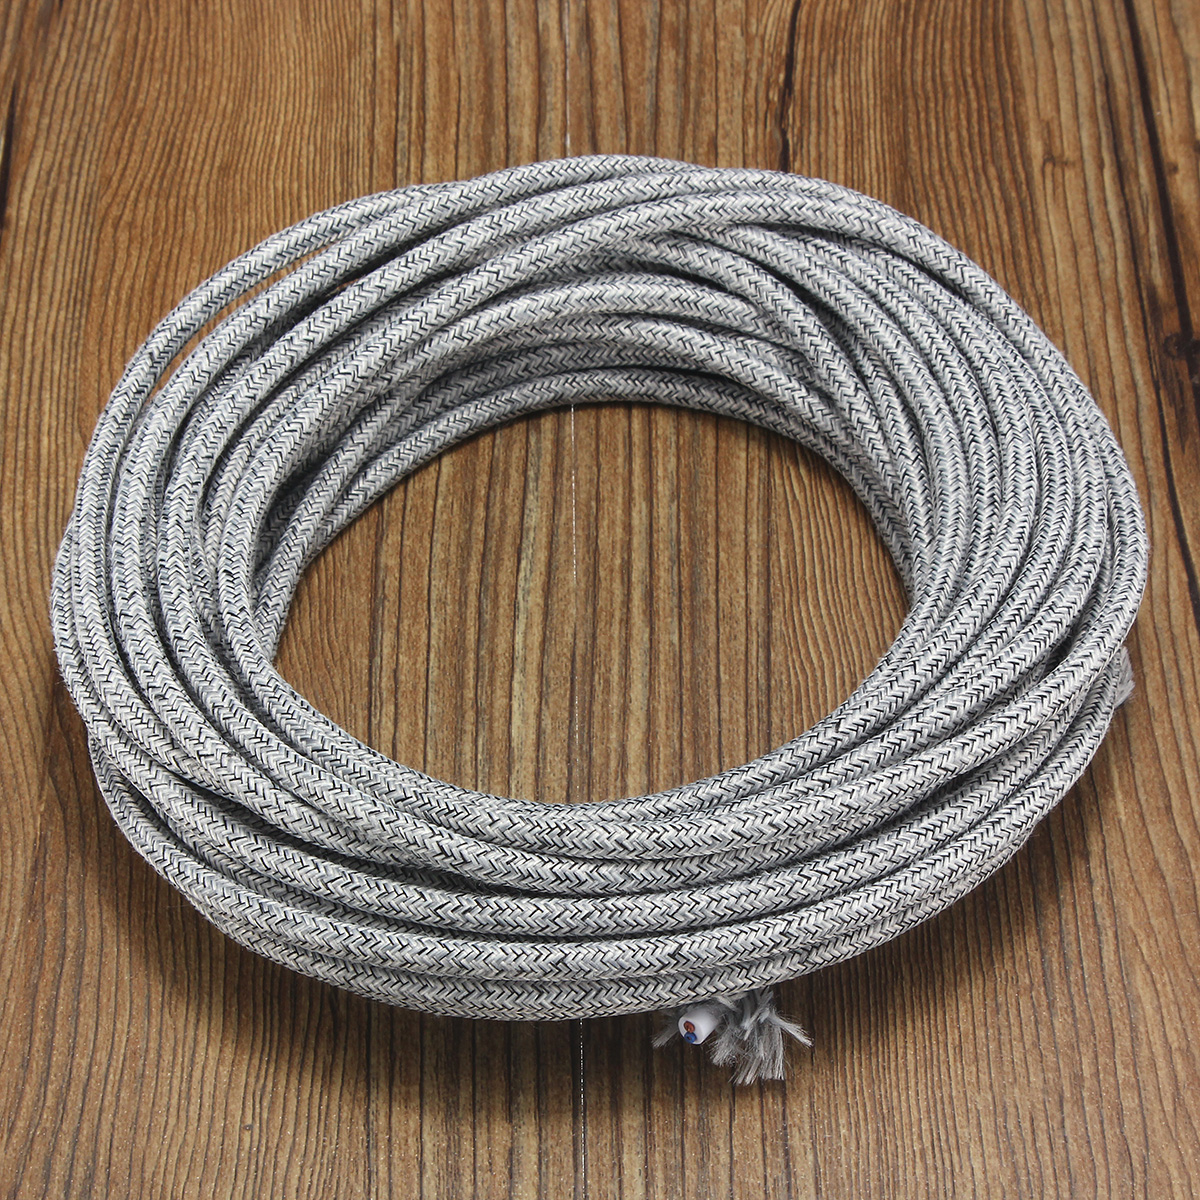 10M-2-Cord-Color-Vintage-Twist-Braided-Fabric-Light-Cable-Electric-Wire-1069140-6